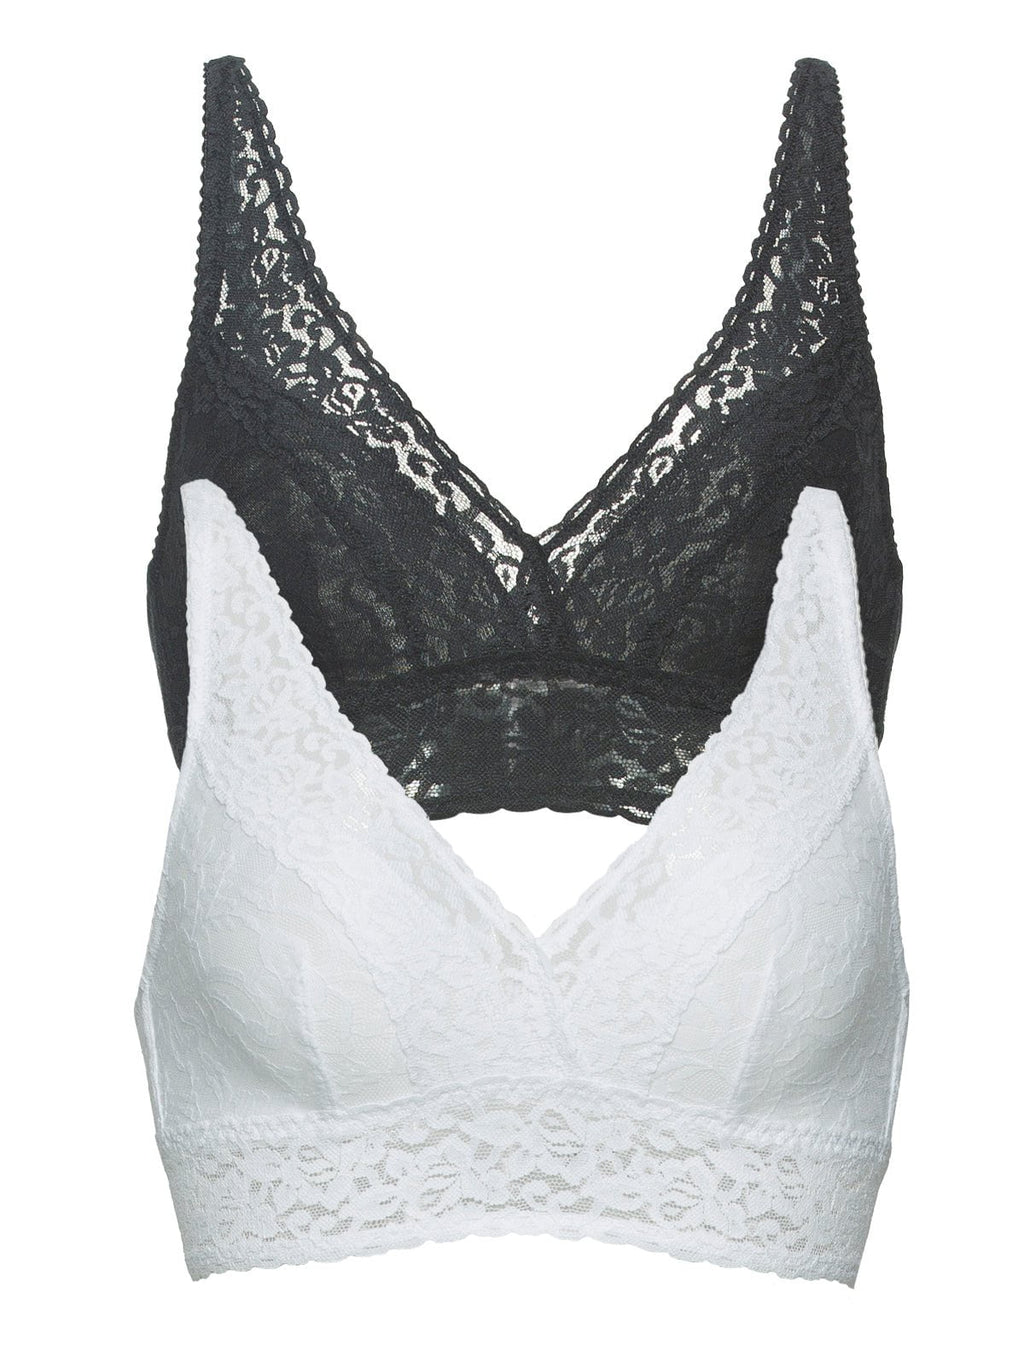 Women Lace Bra Black And White Pack Of 2